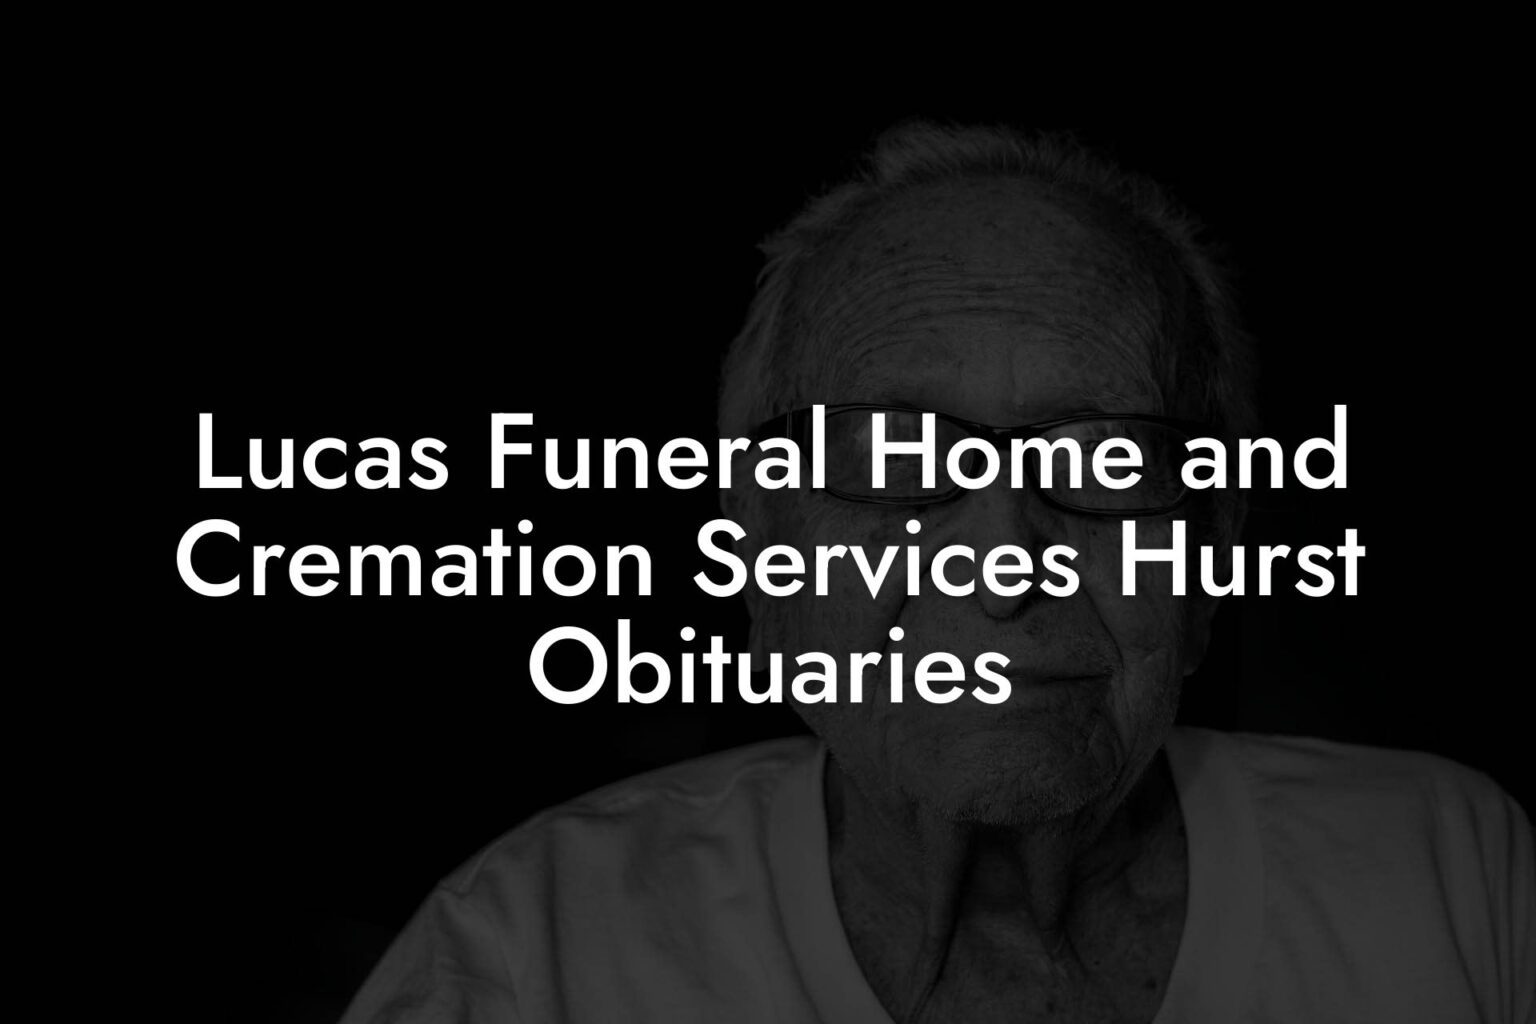 Lucas Funeral Home And Cremation Services Hurst Obituaries Eulogy Assistant 